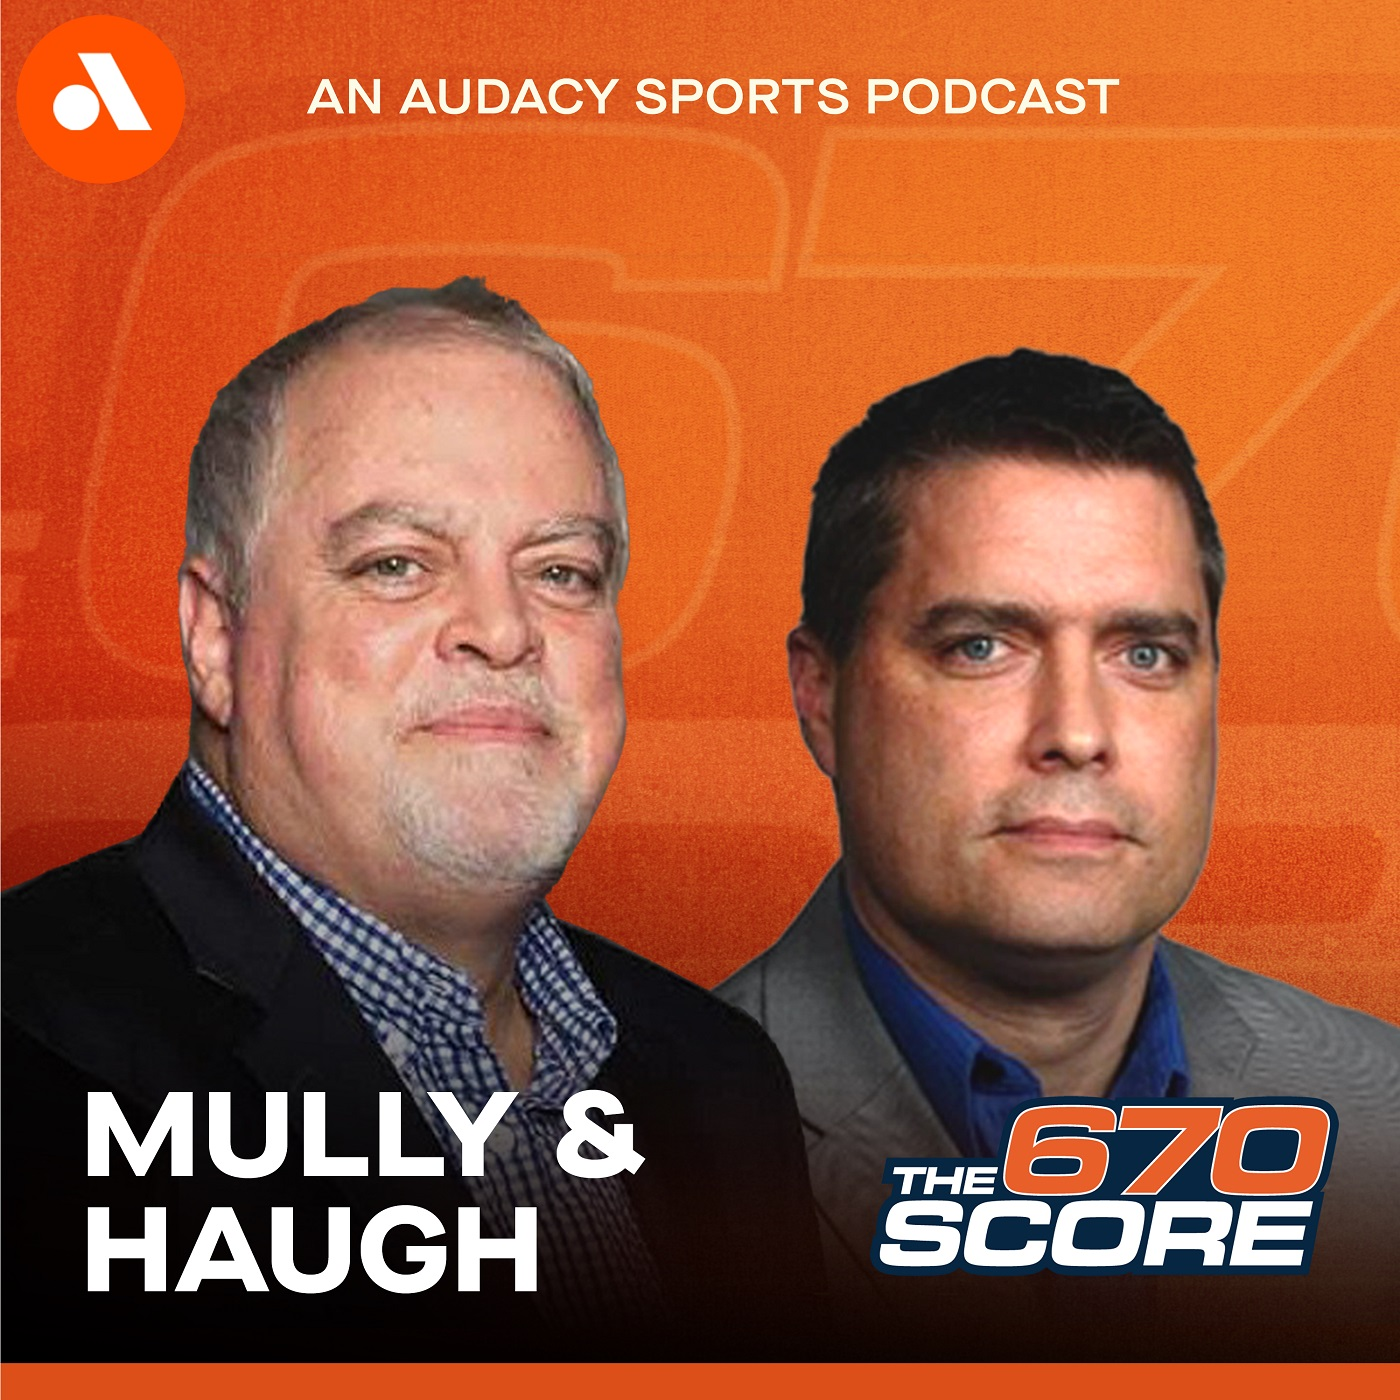 Mully & Haugh: Ryan McDonough interview, Sweet 16 preview (Hour 4)